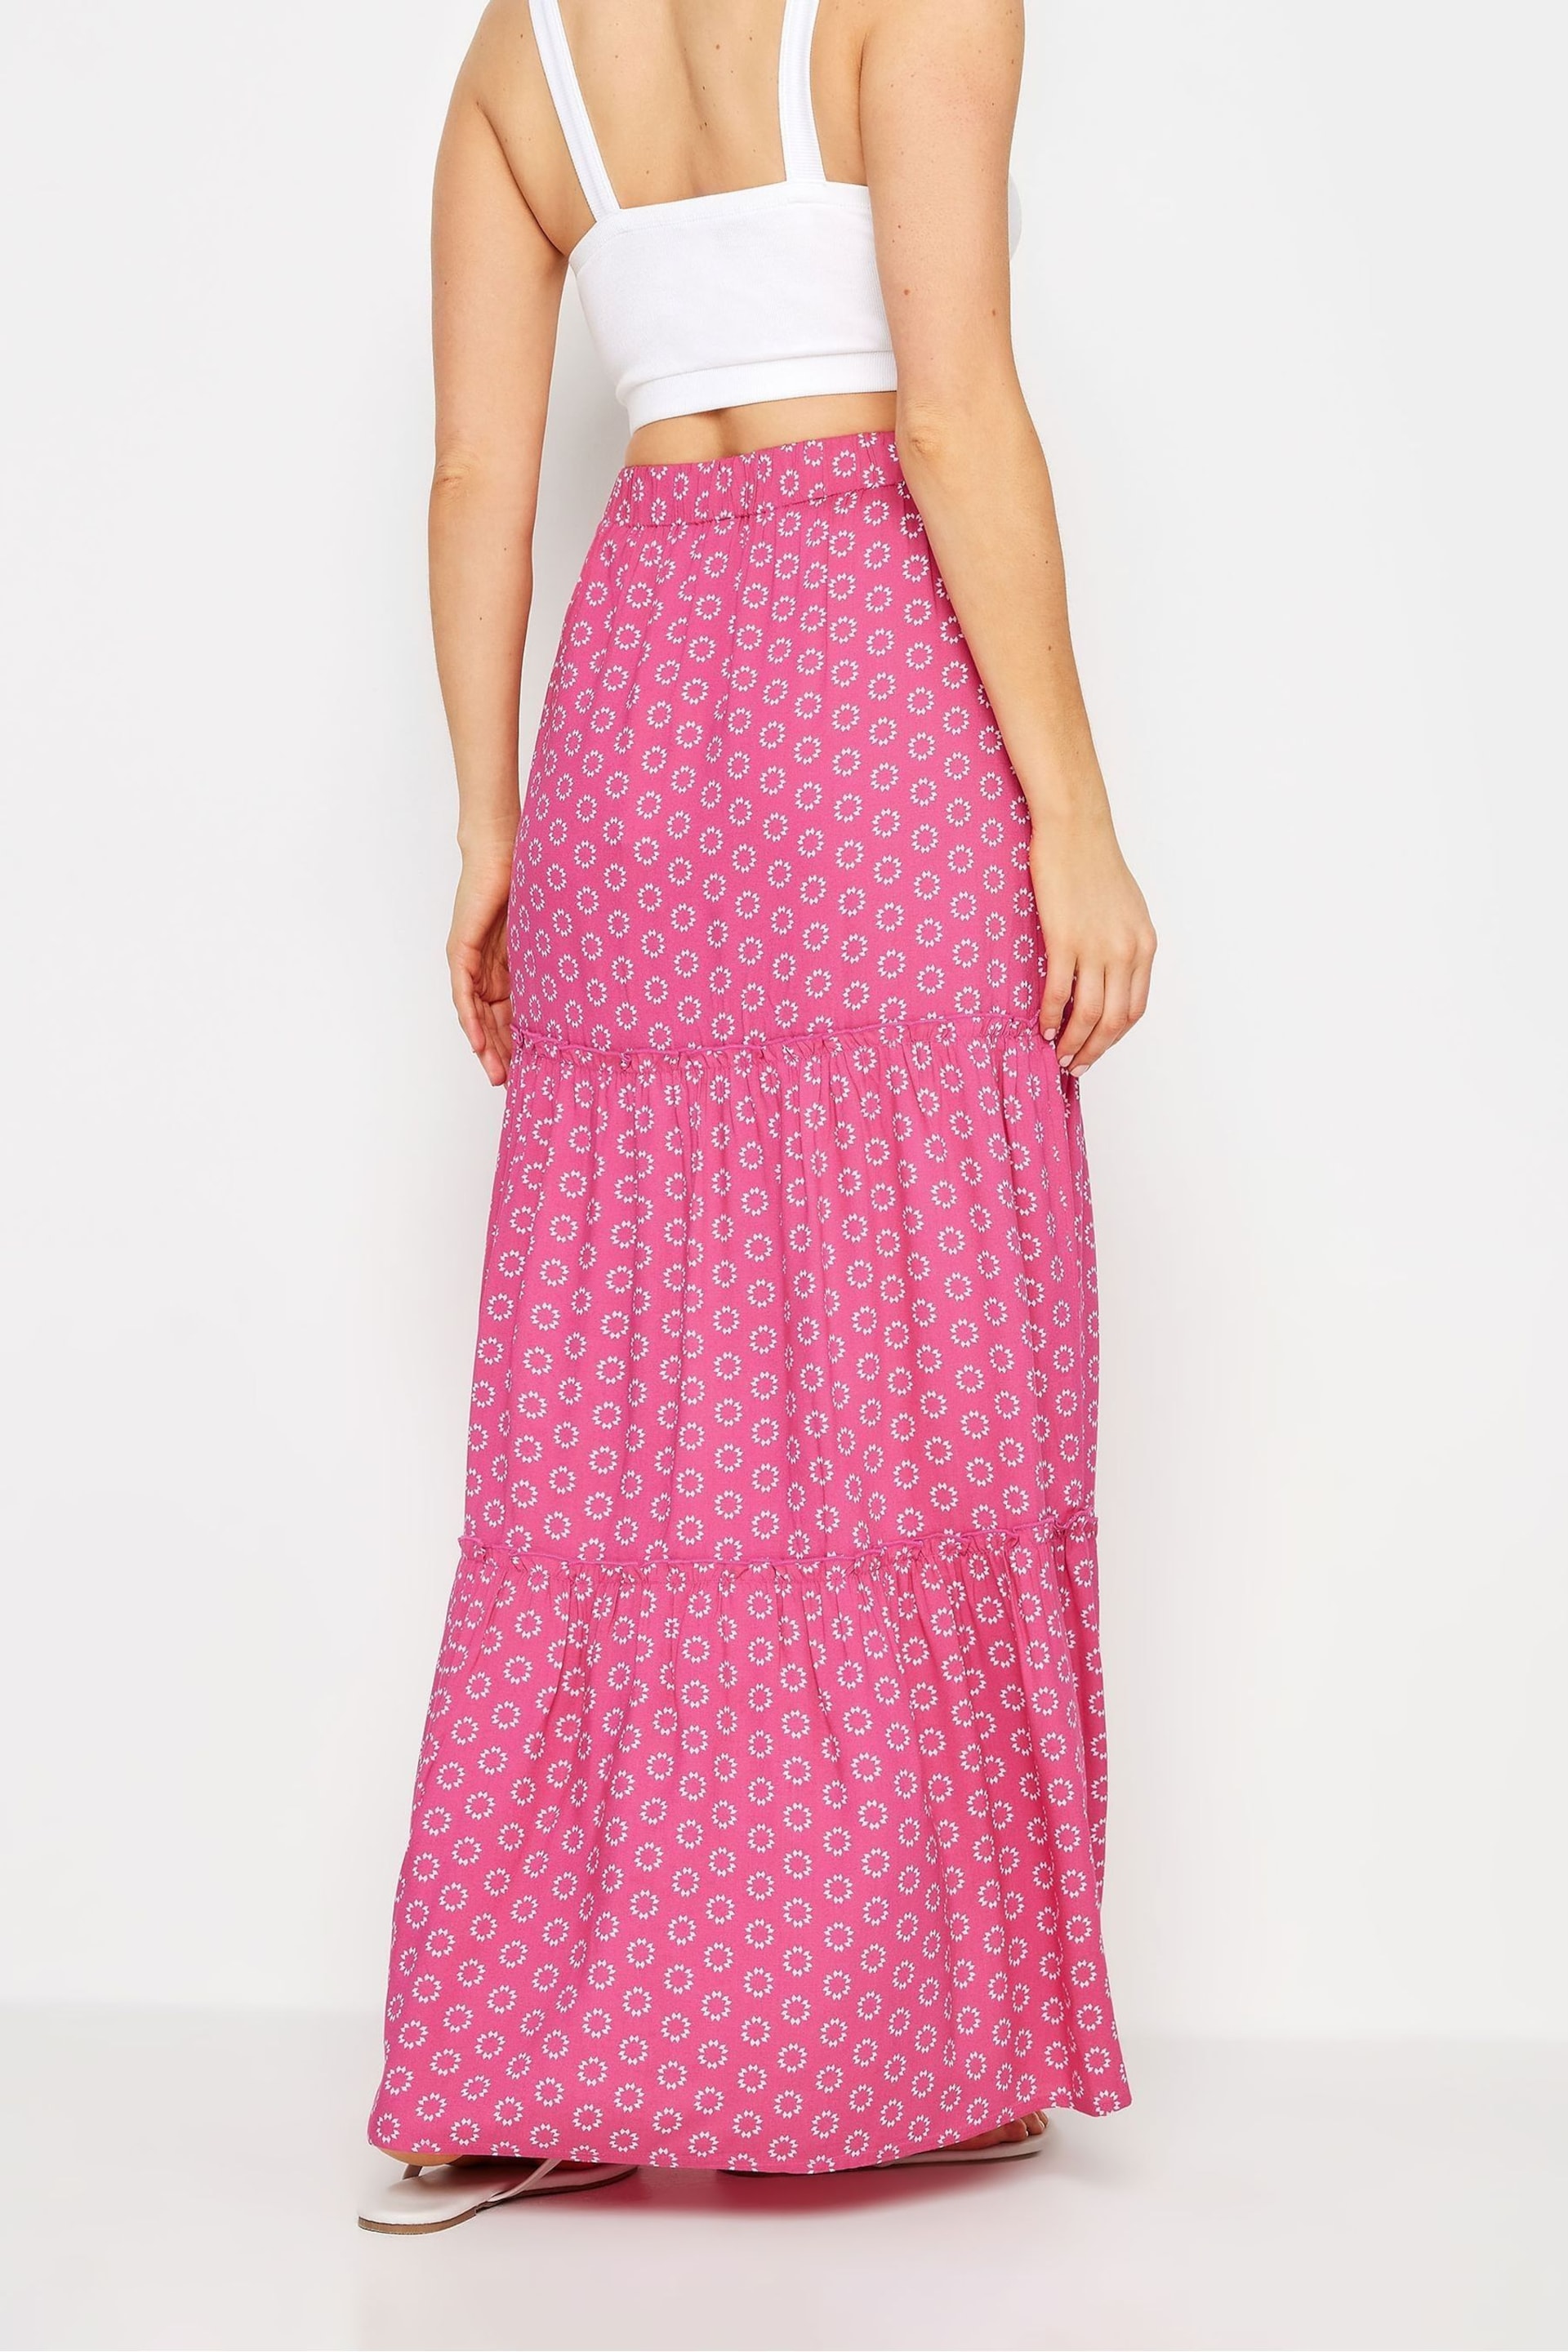 Long Tall Sally Pink Printed Tiered Maxi Skirt - Image 3 of 5